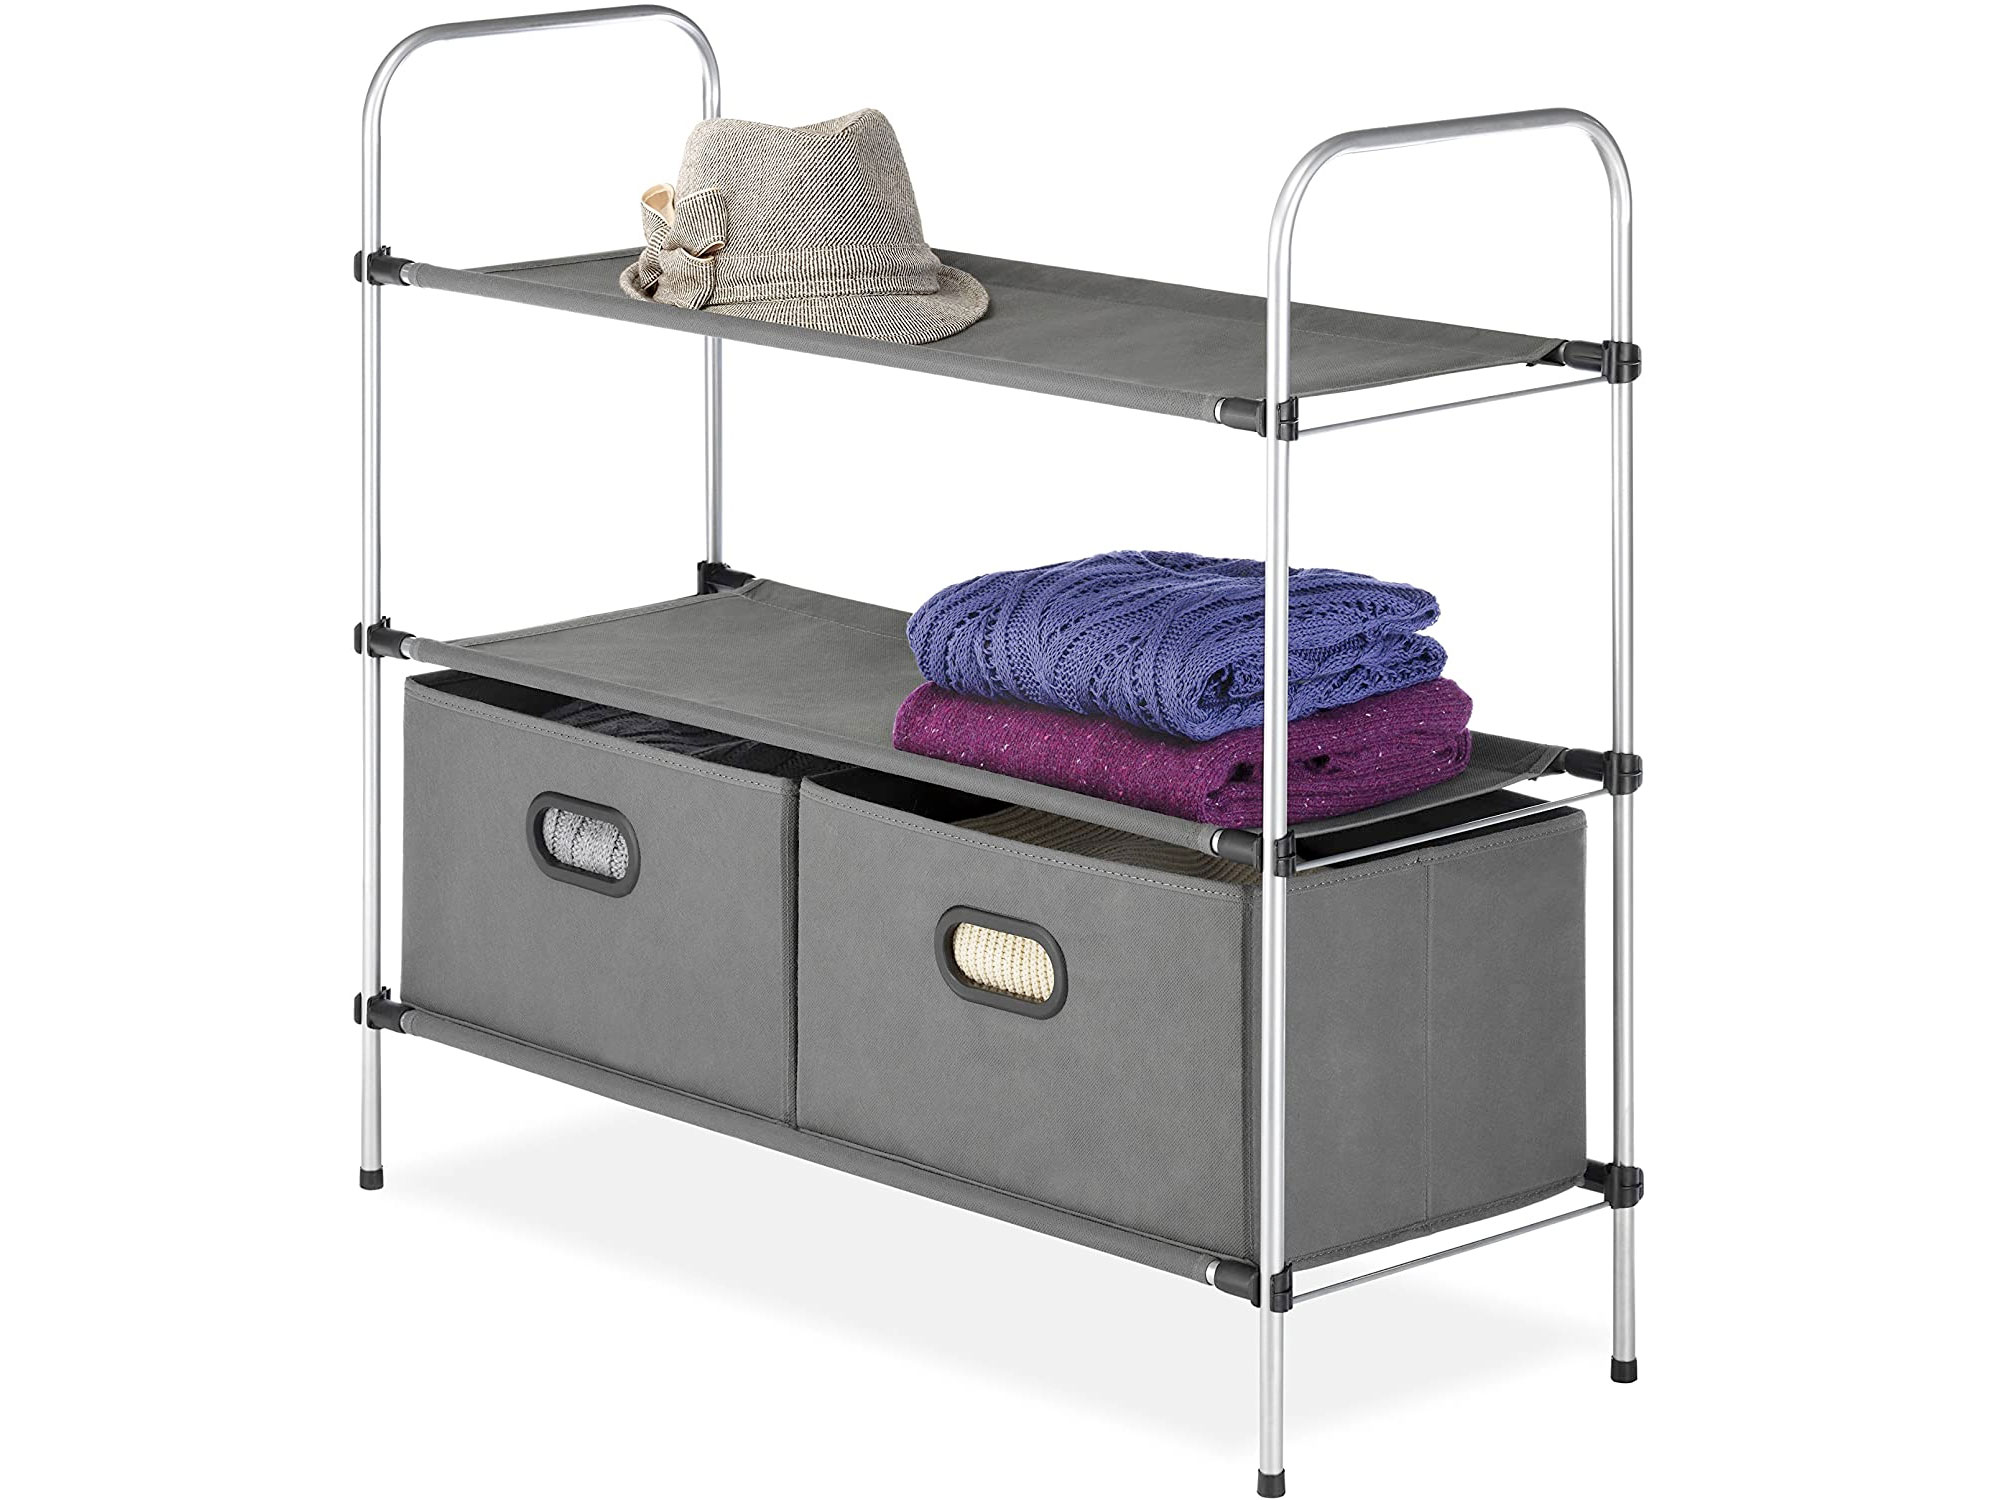 Amazon：Closet Organizer Collection (3 Tier Shelves with 2 Collapsible Drawers)只卖$21.99